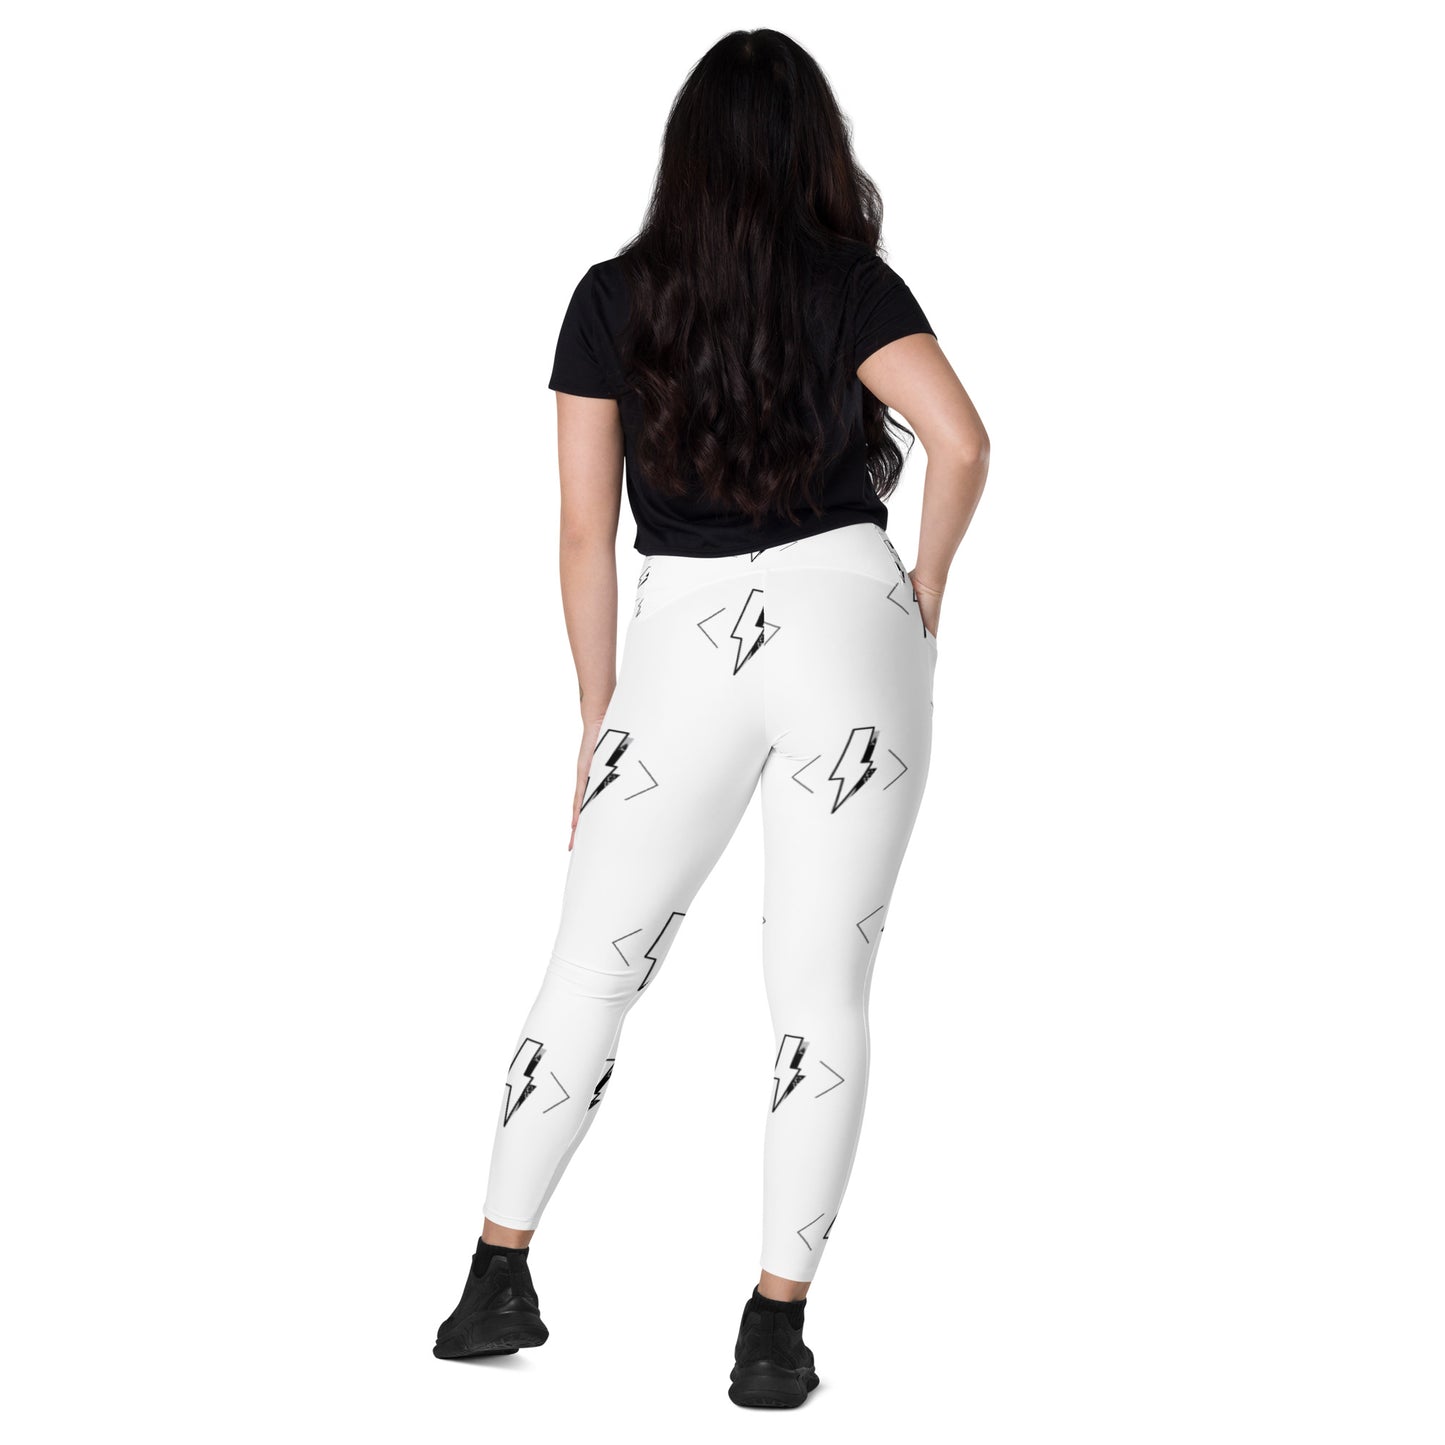 Coffey & Code Crossover leggings with pockets